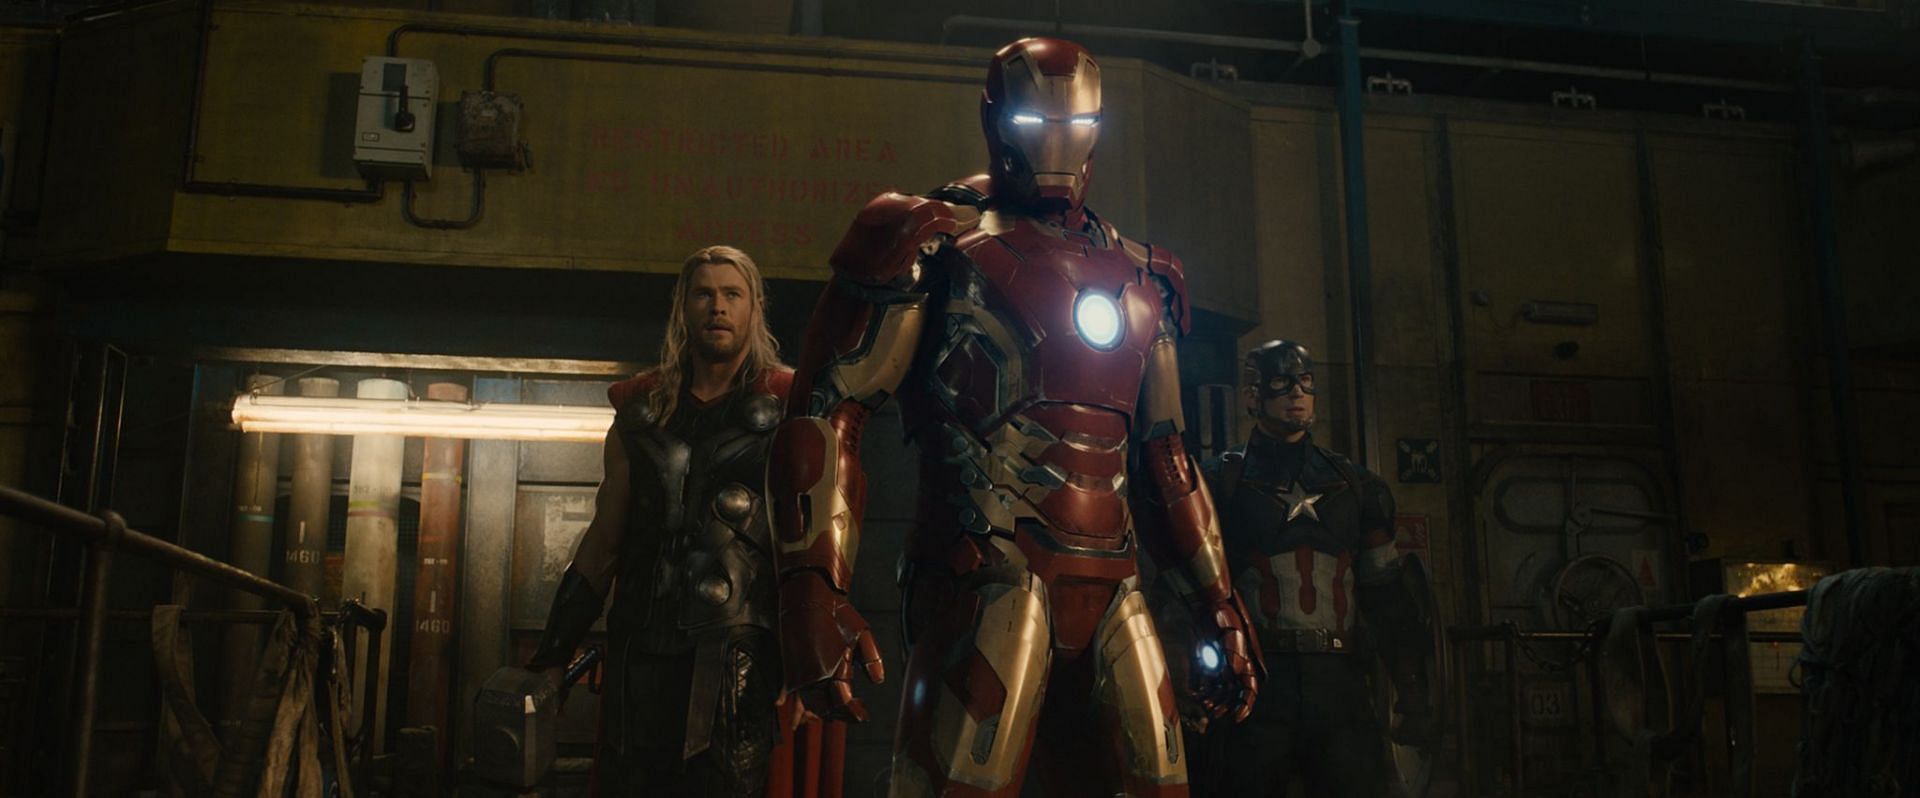 Avengers: Age of Ultron balances multiple characters and plotlines, giving each character a chance to shine (Image via Marvel Studios)